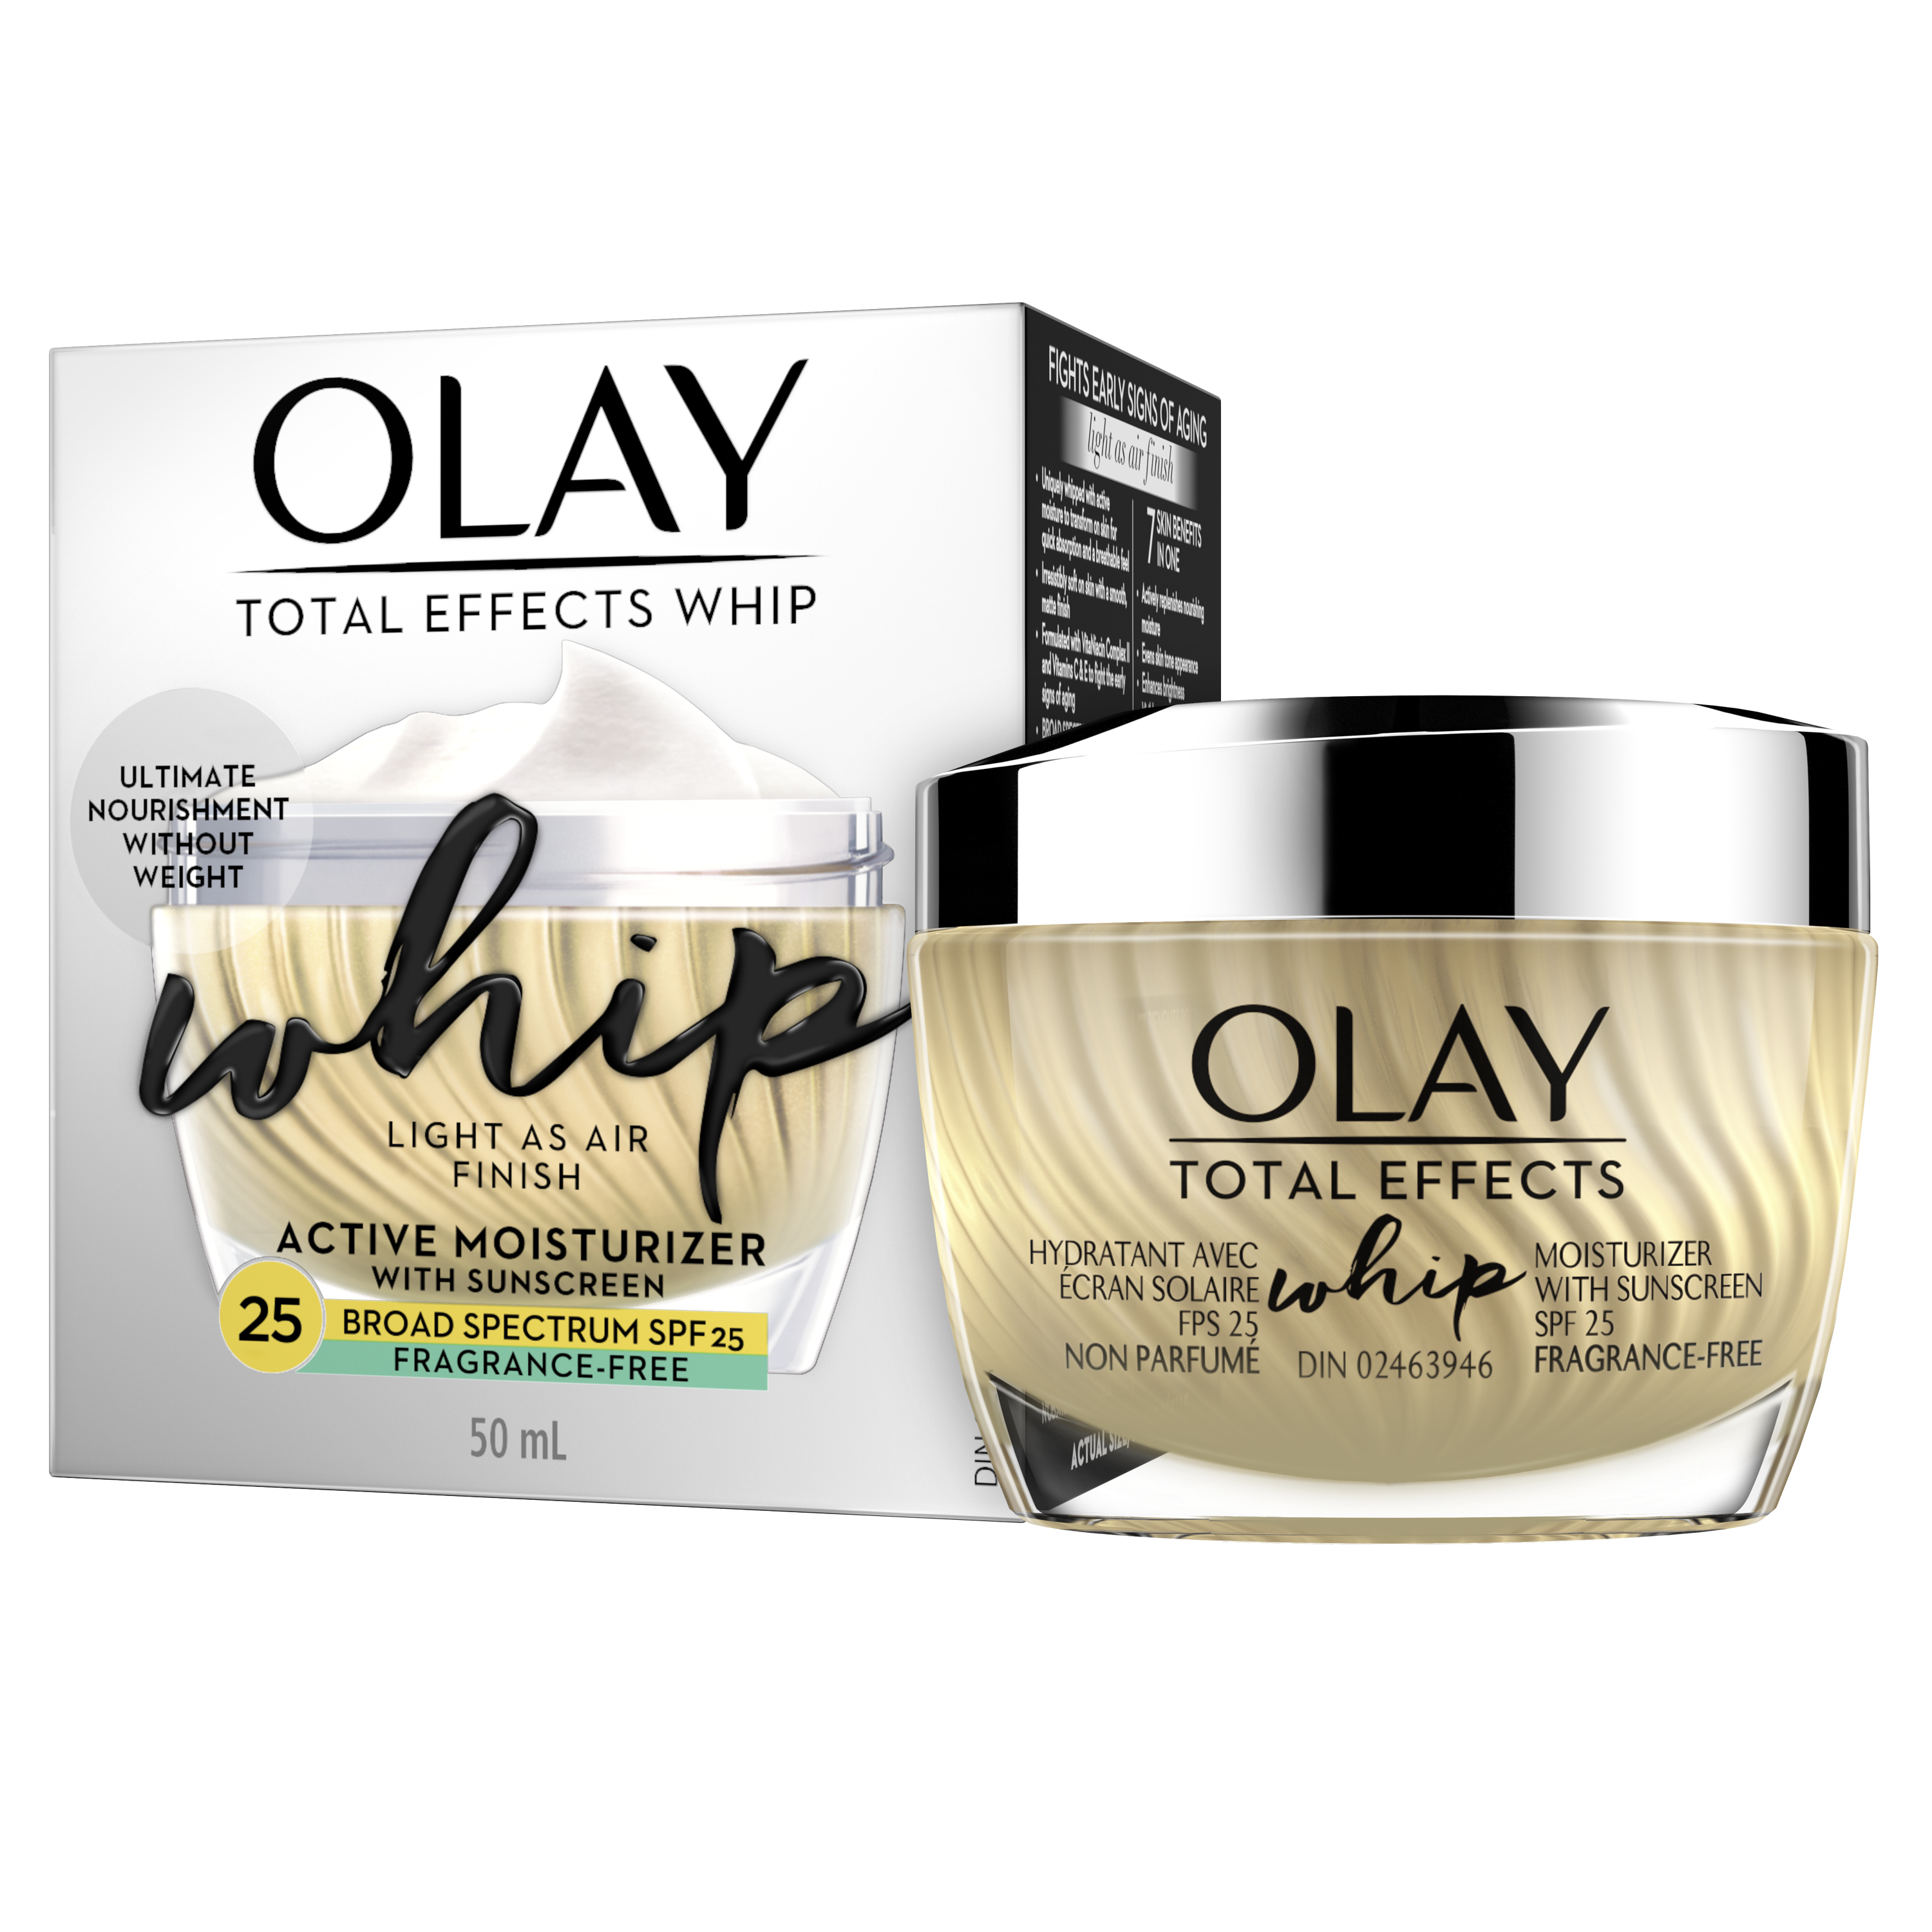 Olay Total Effects Whip Face Moisturizer SPF 25 Fragrance Free 50 ml_2